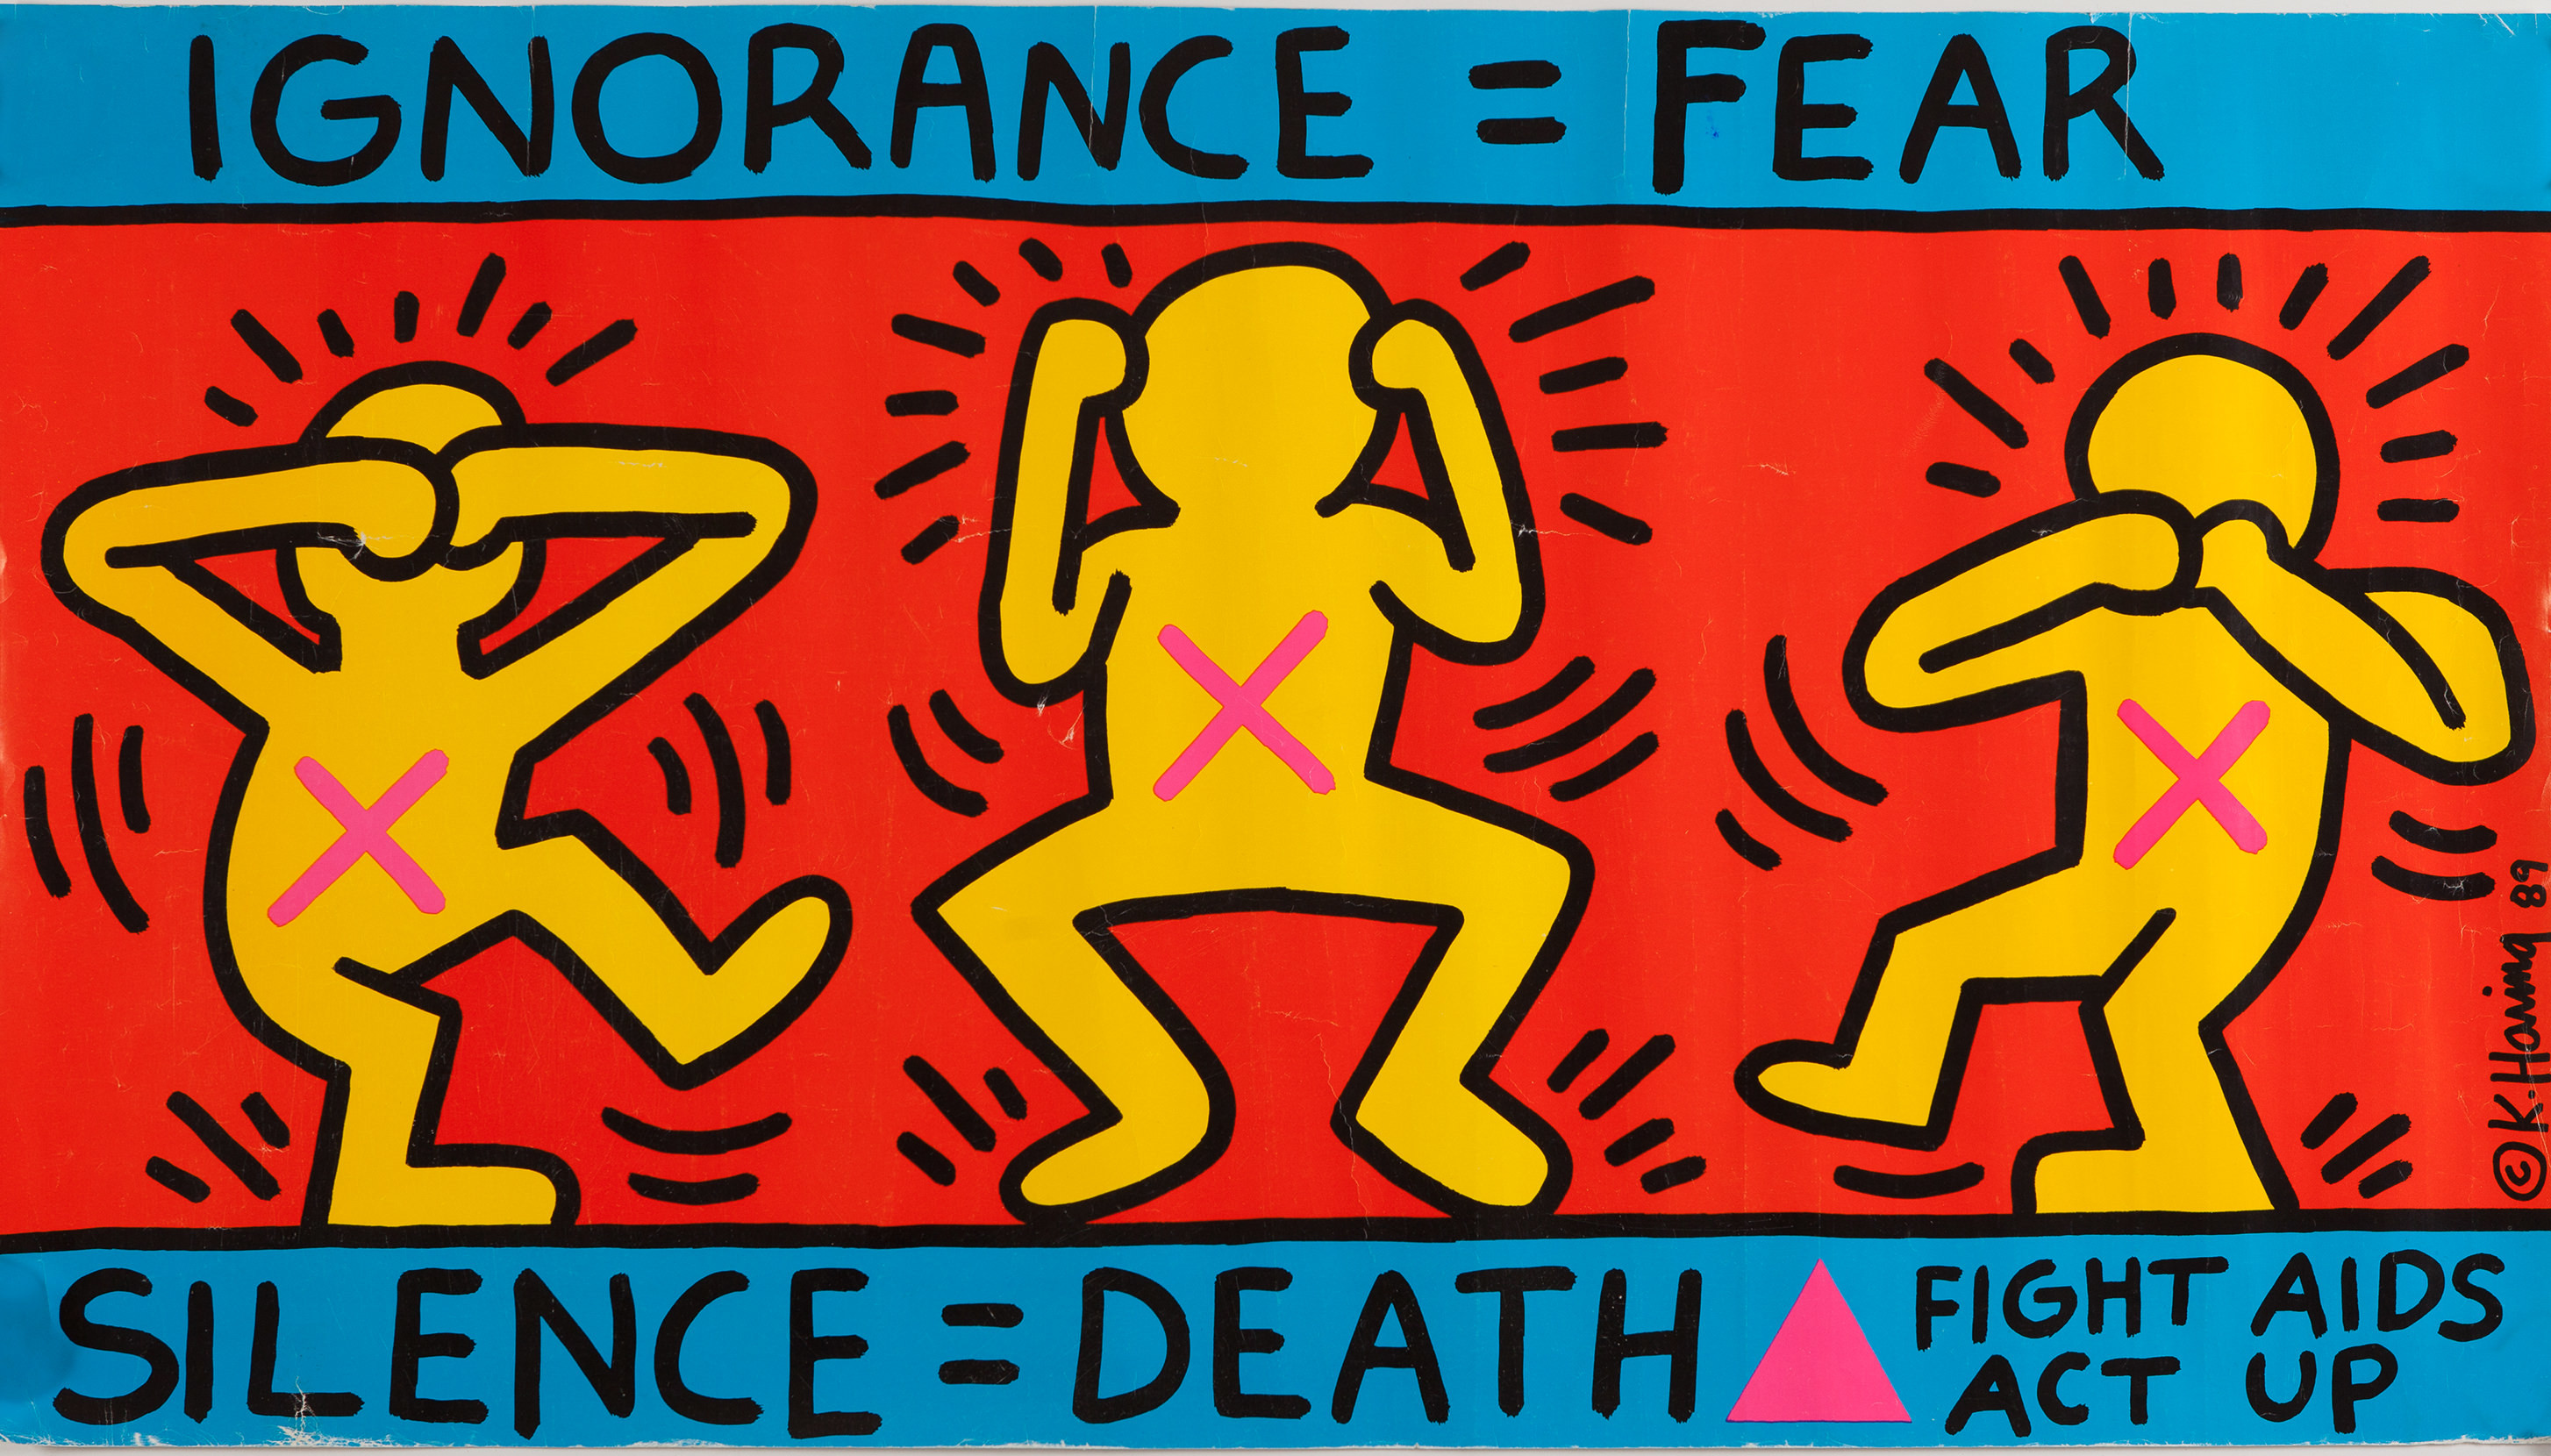 2908x1660 Haring's work was often heavily political and his imagery has become a  widely recognized visual language of the 20th century. Keith Haring was an  artist ...